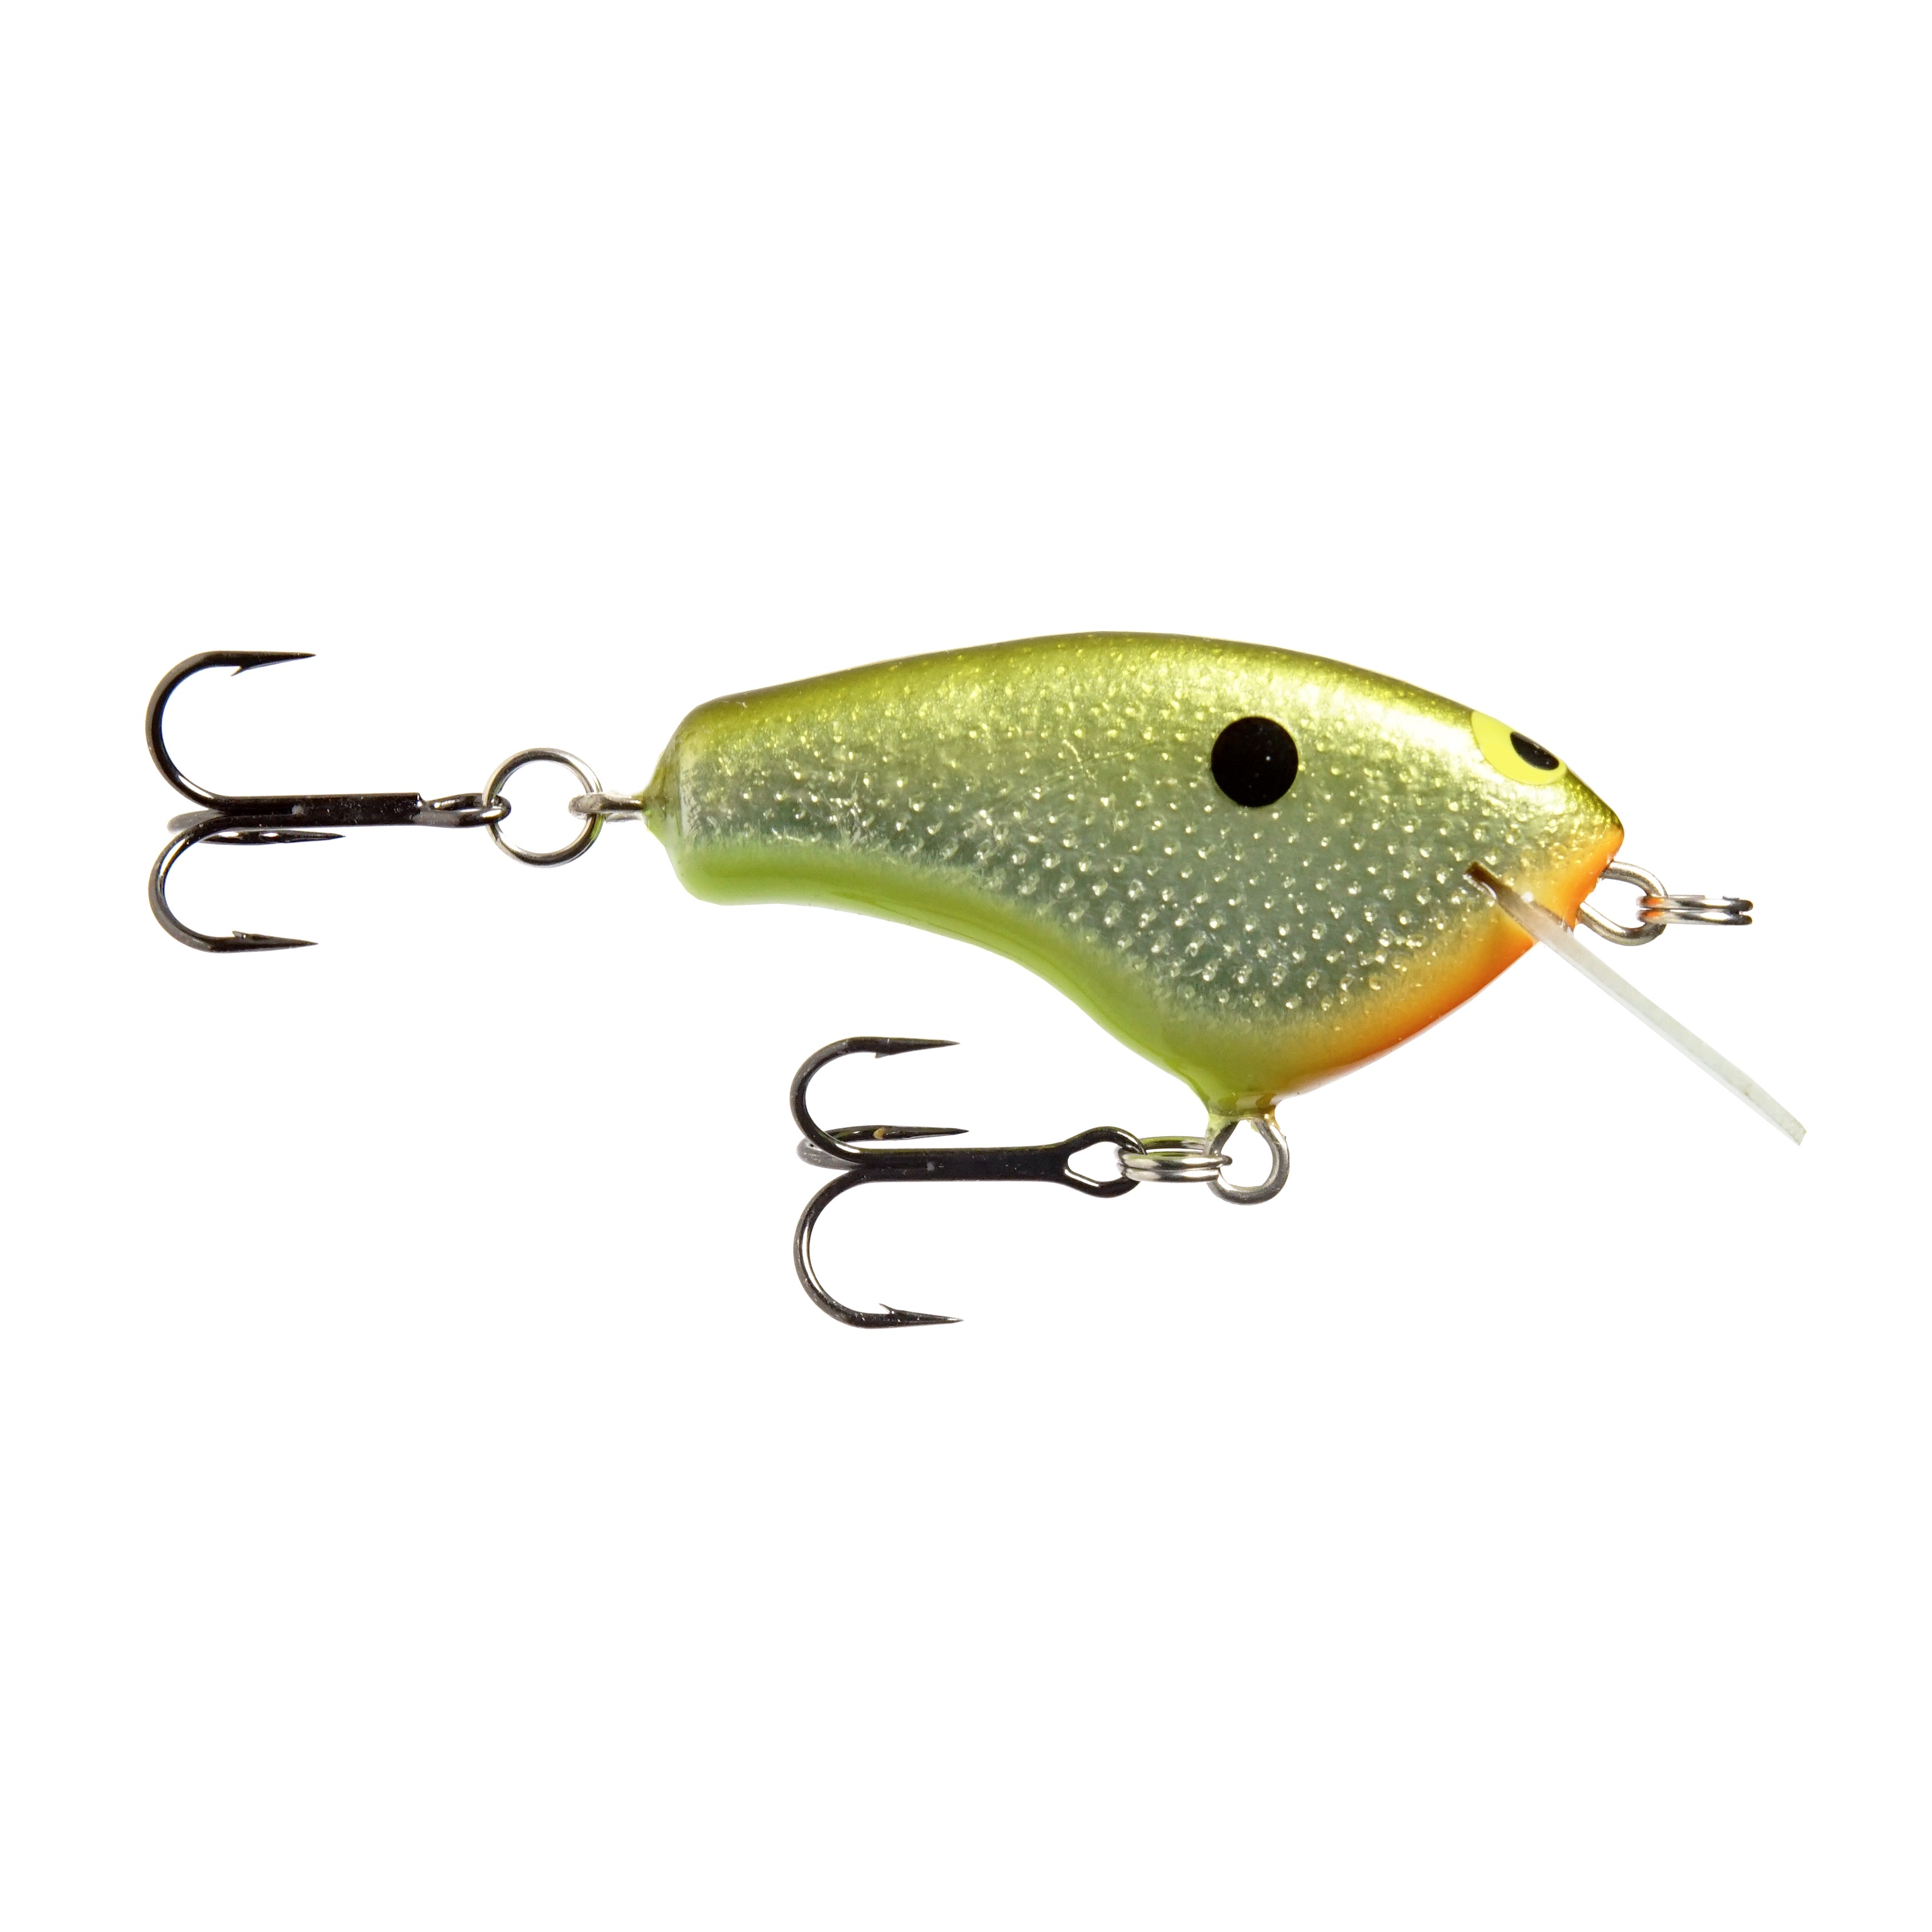 Mann's Bait Company Little George Fishing Lure, Chartreuse, 0.5 Oz.